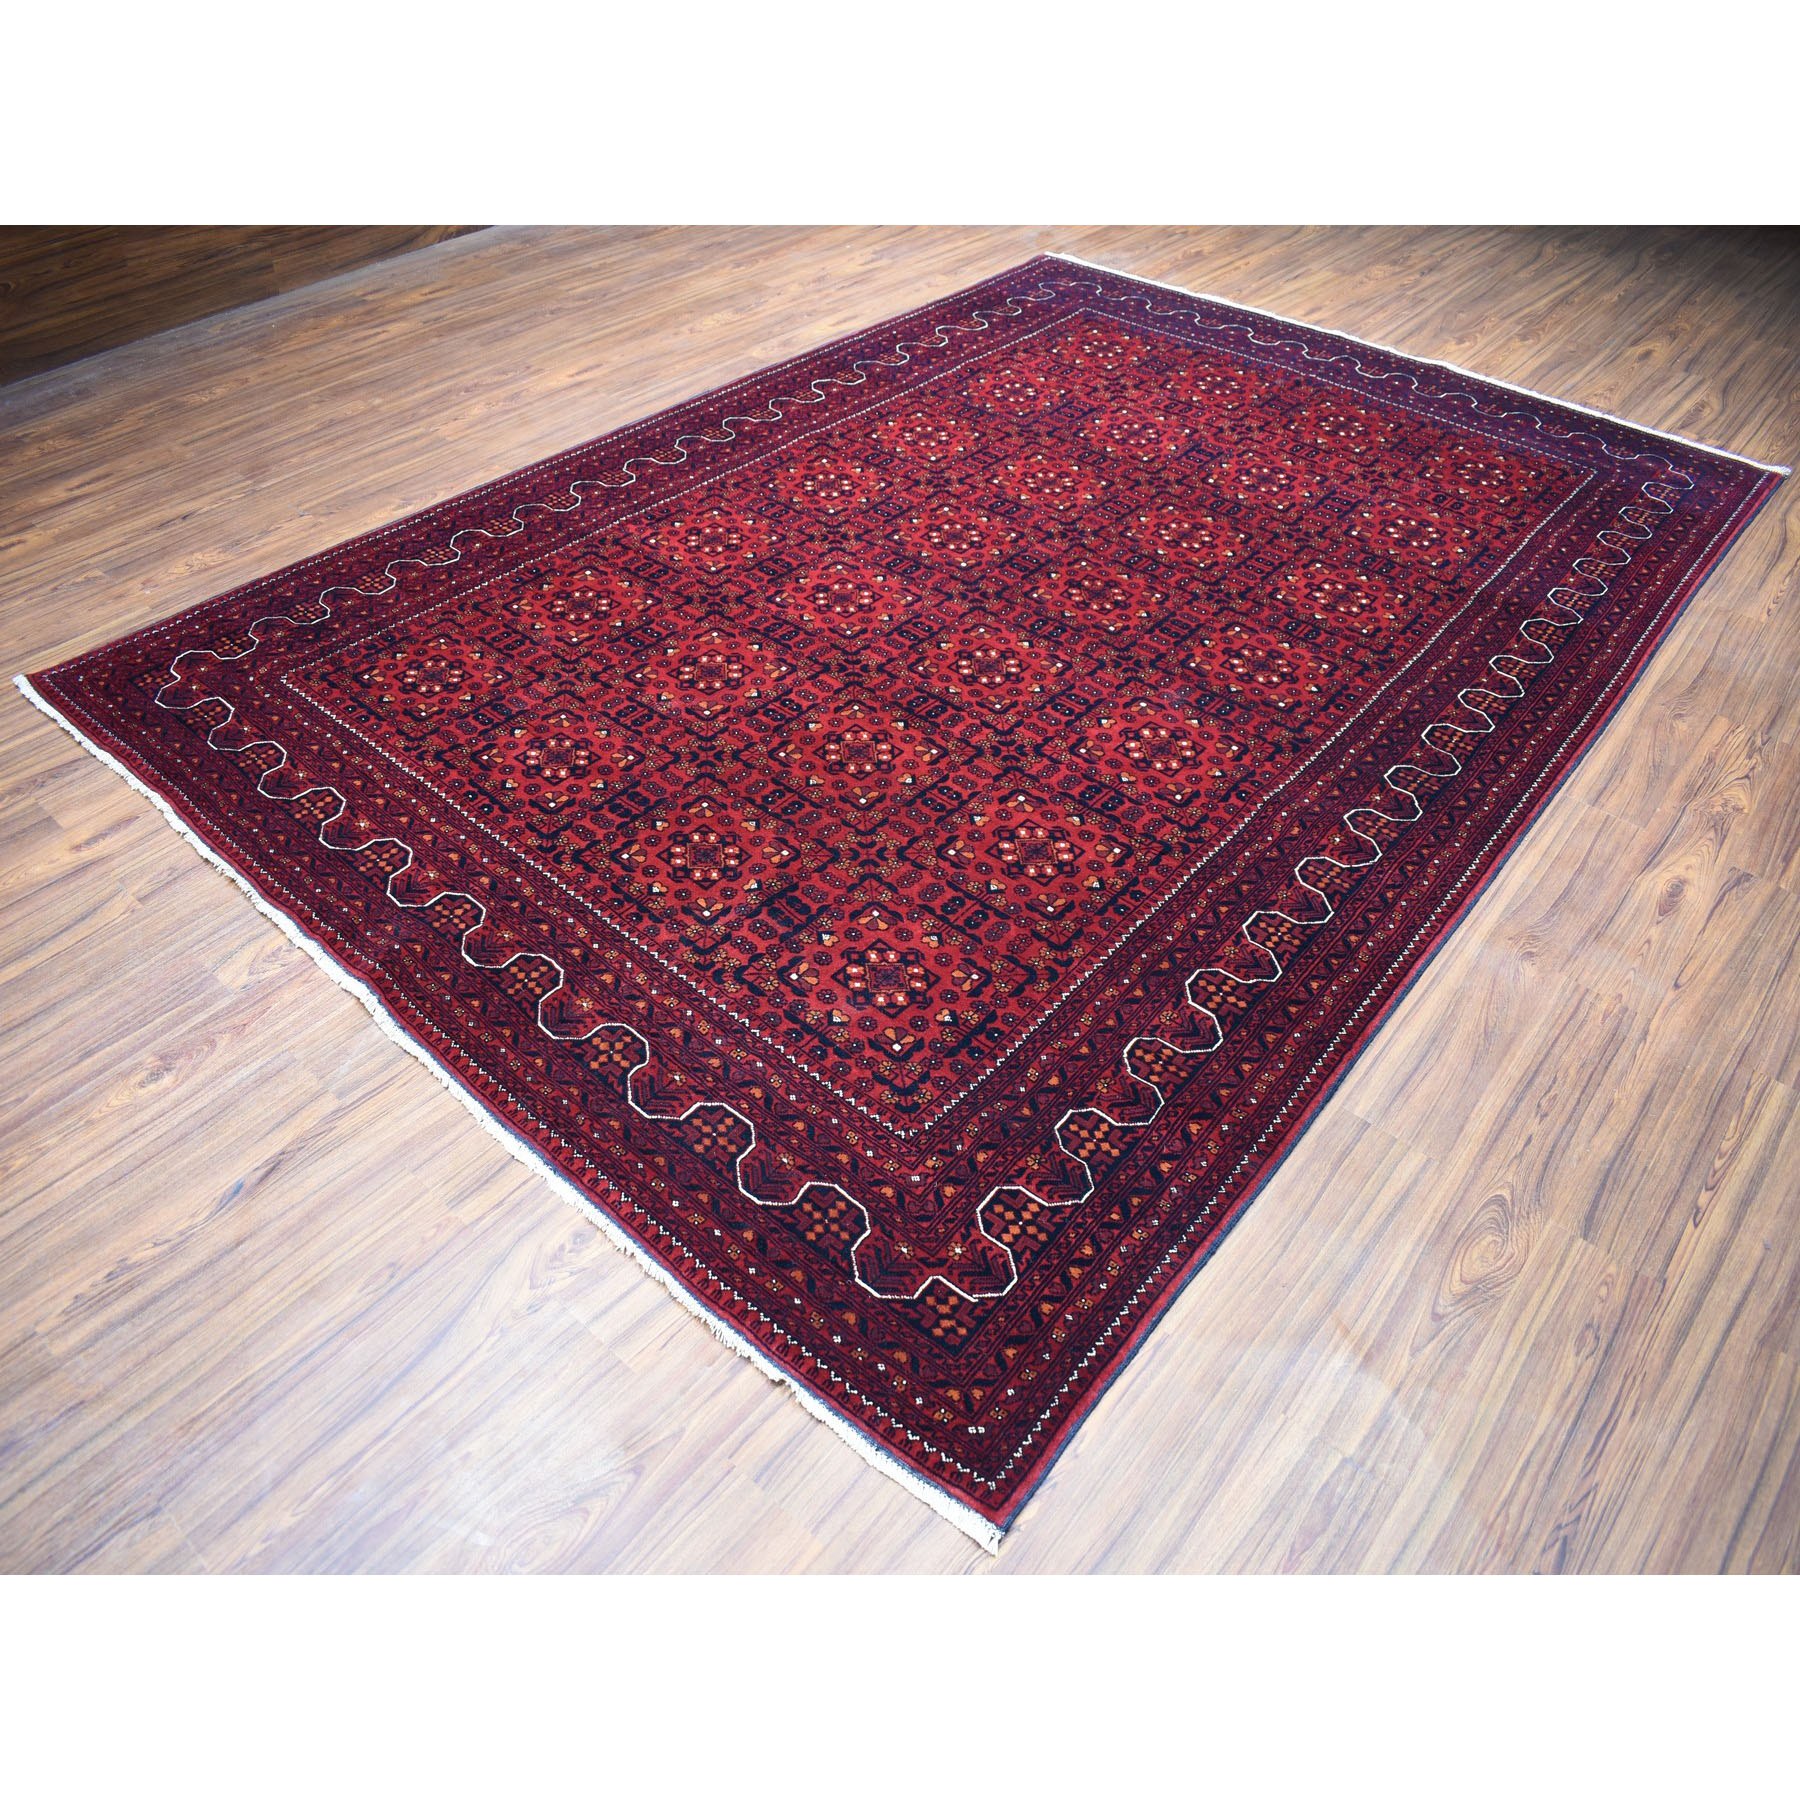 8-x11-3  Afghan Khamyab Natural Dyes Pure Wool Hand-Knotted Oriental Rug 